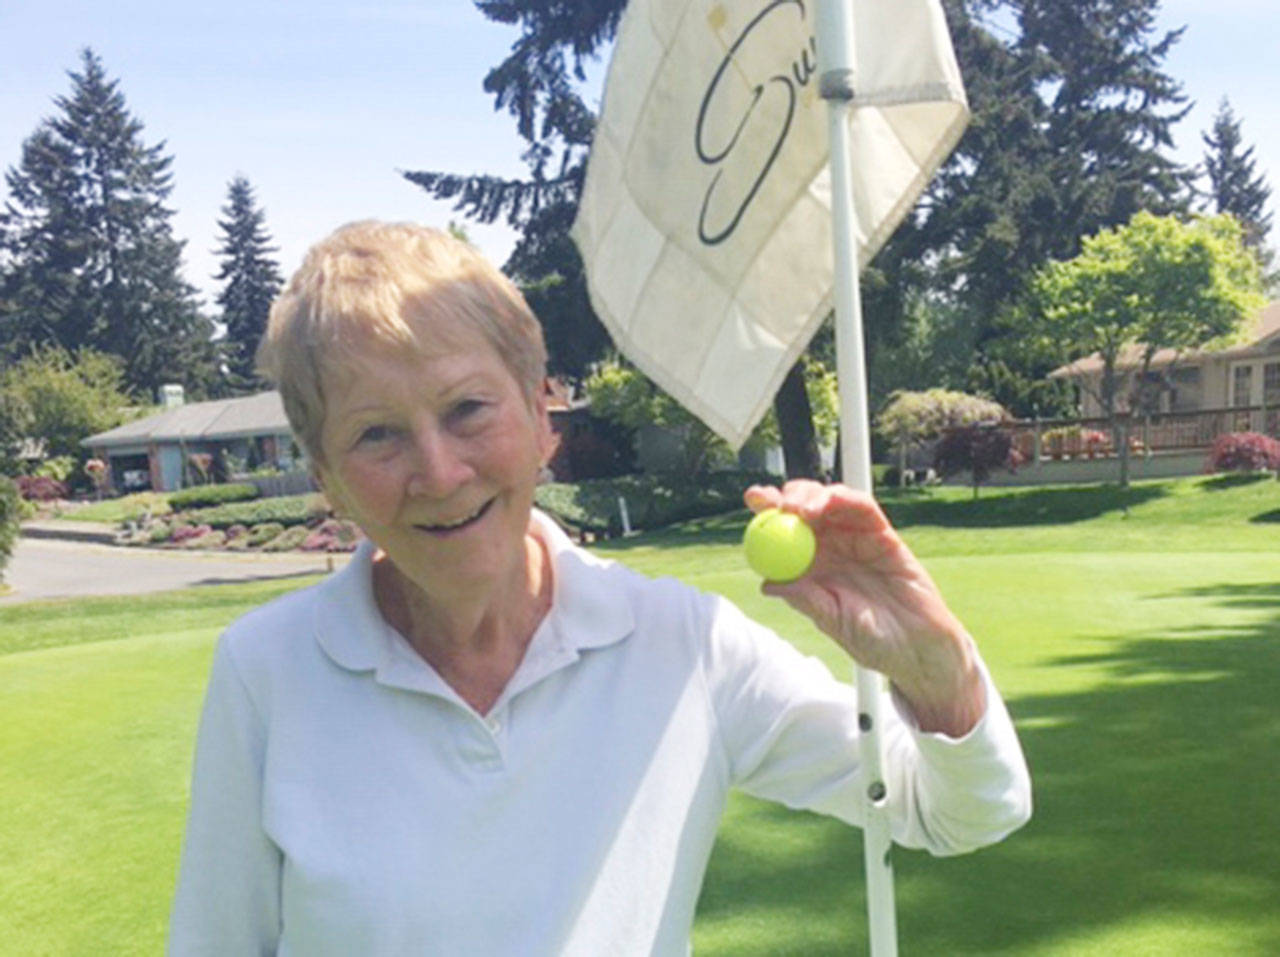 Long-time club member Linda Collet celebrates a hole-in-one at Sunland Golf and Country Club on May 9. Collet aced the No. 5 hole at Sunland, driving the 106 yards from the silver tees. Submitted photo